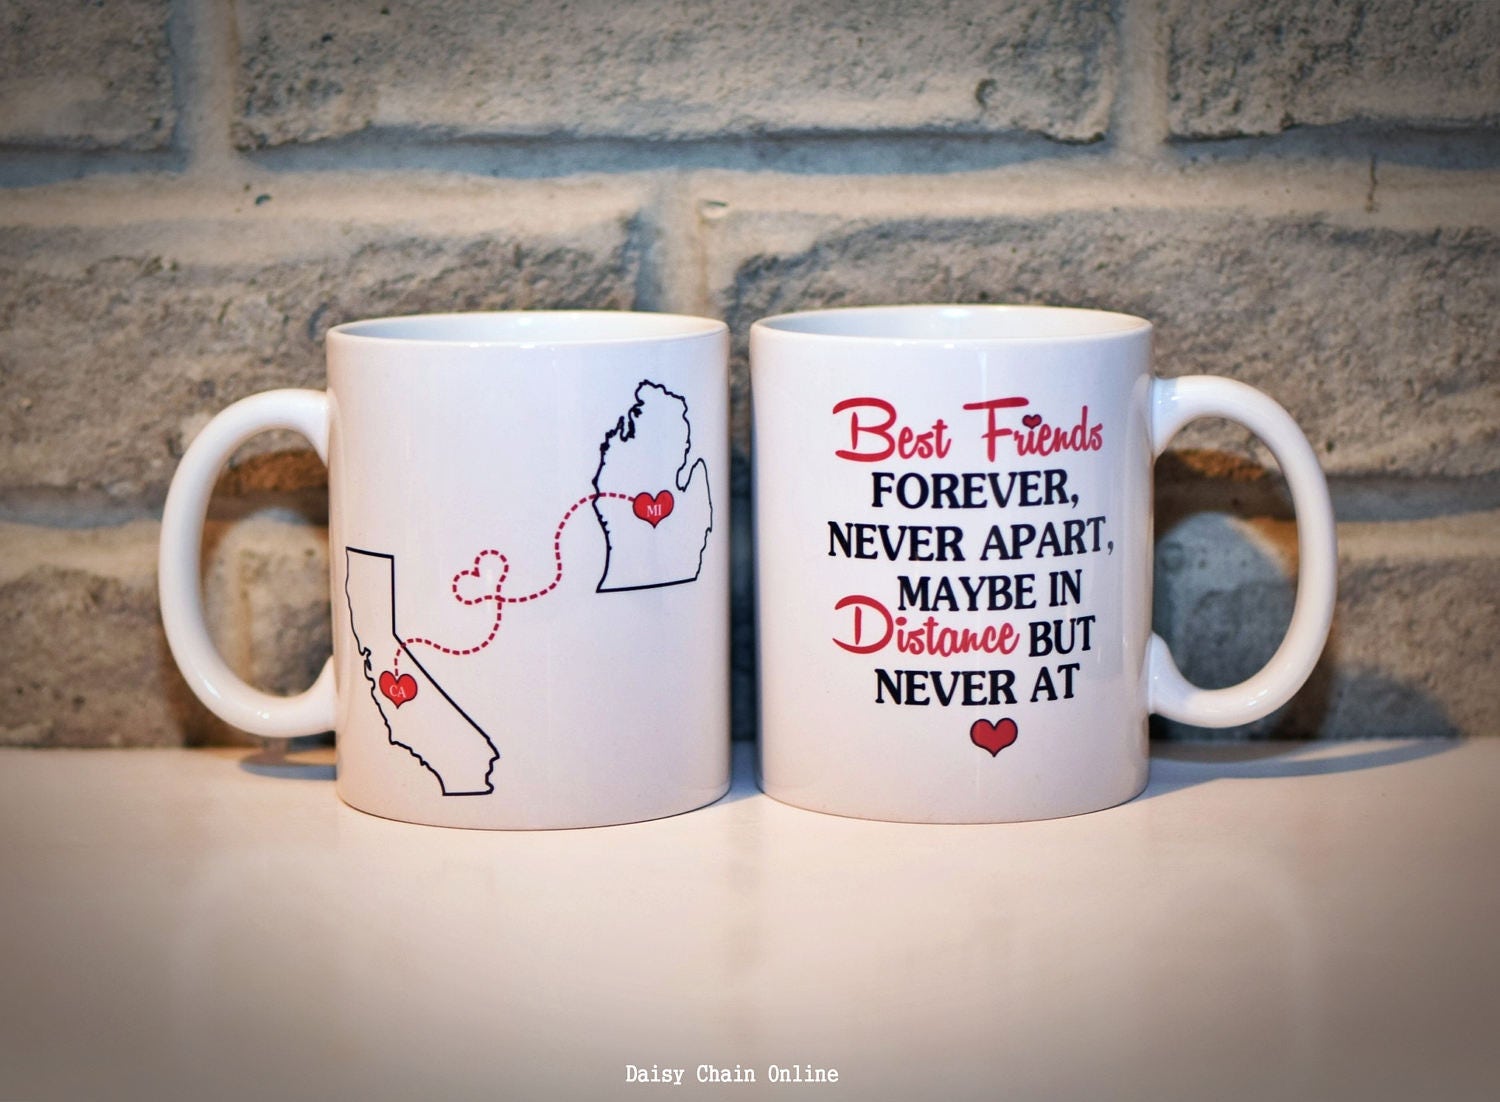 Friend lives far. Кружка Мисс босс. Кружки all for the best. Best Mugs for Gift. To Mug someone.